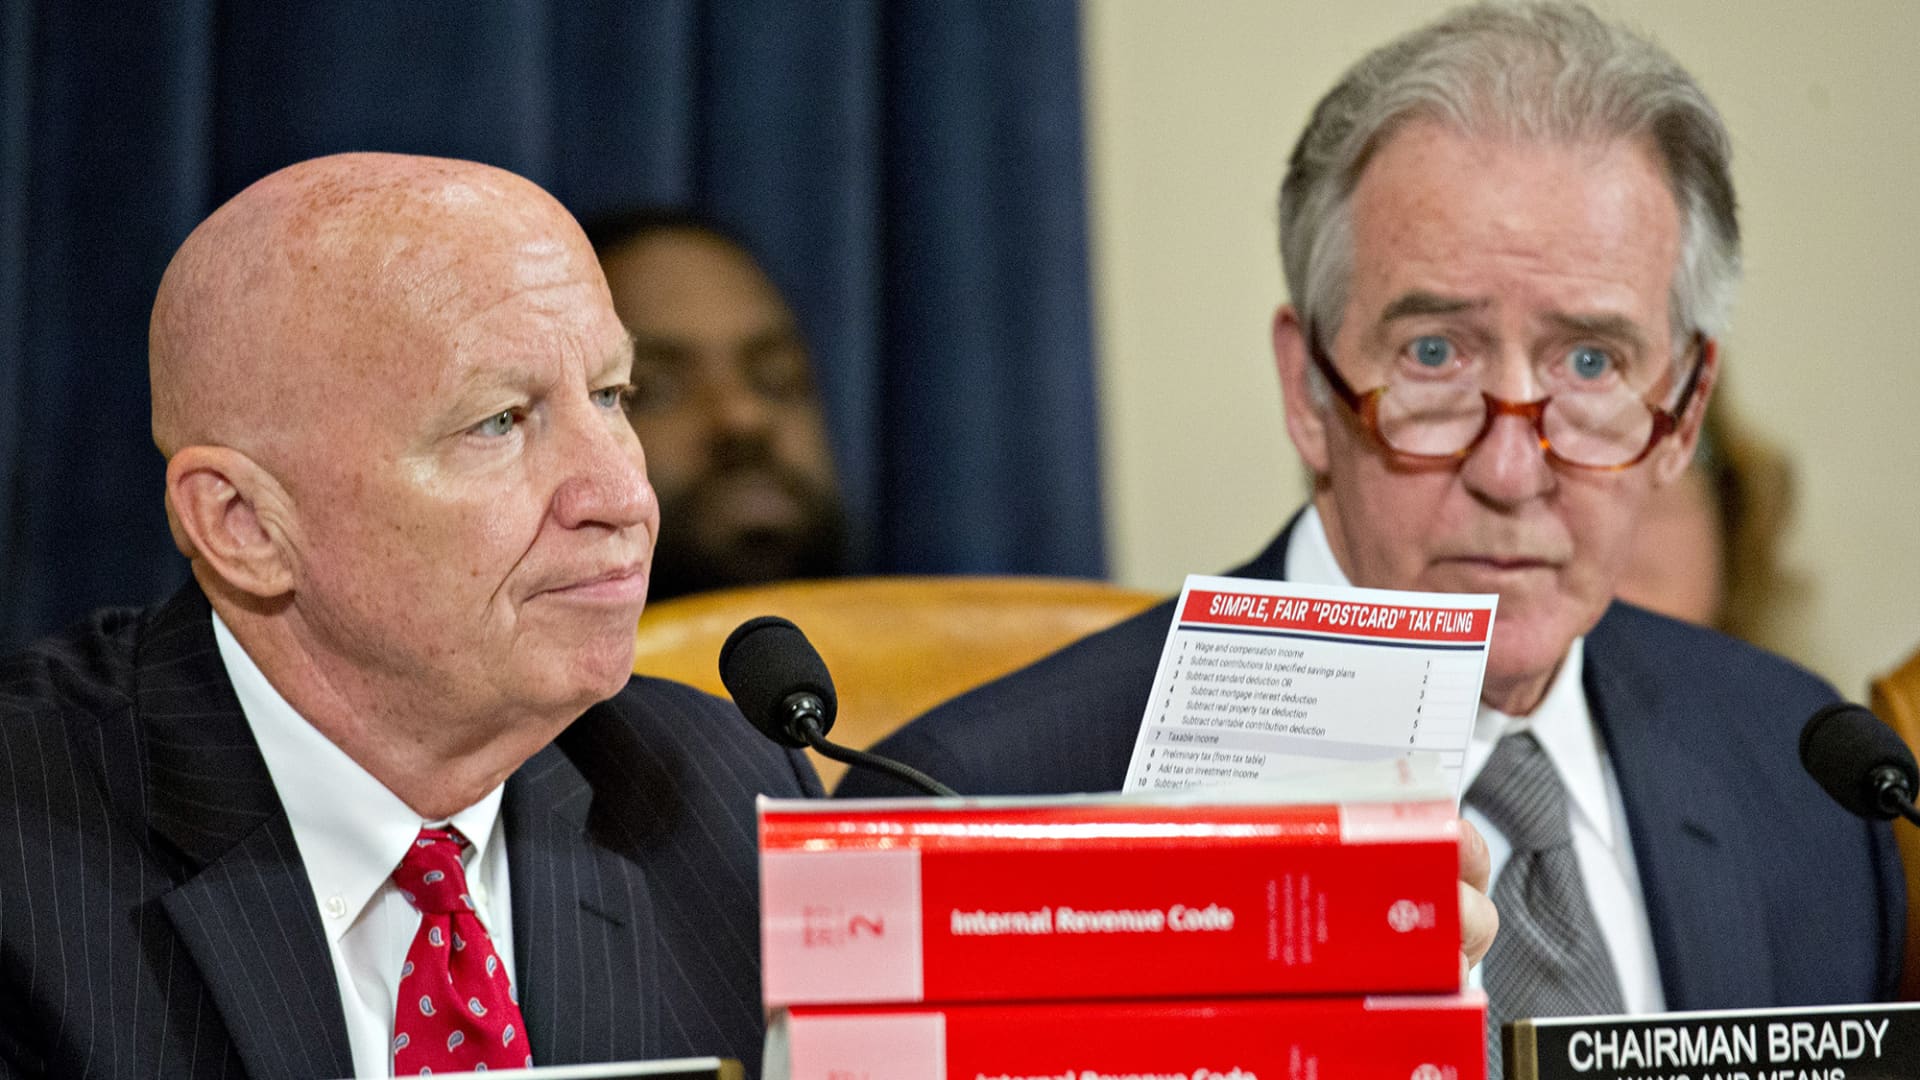 Chairman of the House Ways and Means Committee Rep. Kevin Brady, R-Texas, left, holds up a 'Simple, Fair 'Postcard' Tax Filing' card next to ranking member Rep. Richard Neal, D-Mass., during a markup hearing in Washington, D.C., on Nov. 6, 2017.